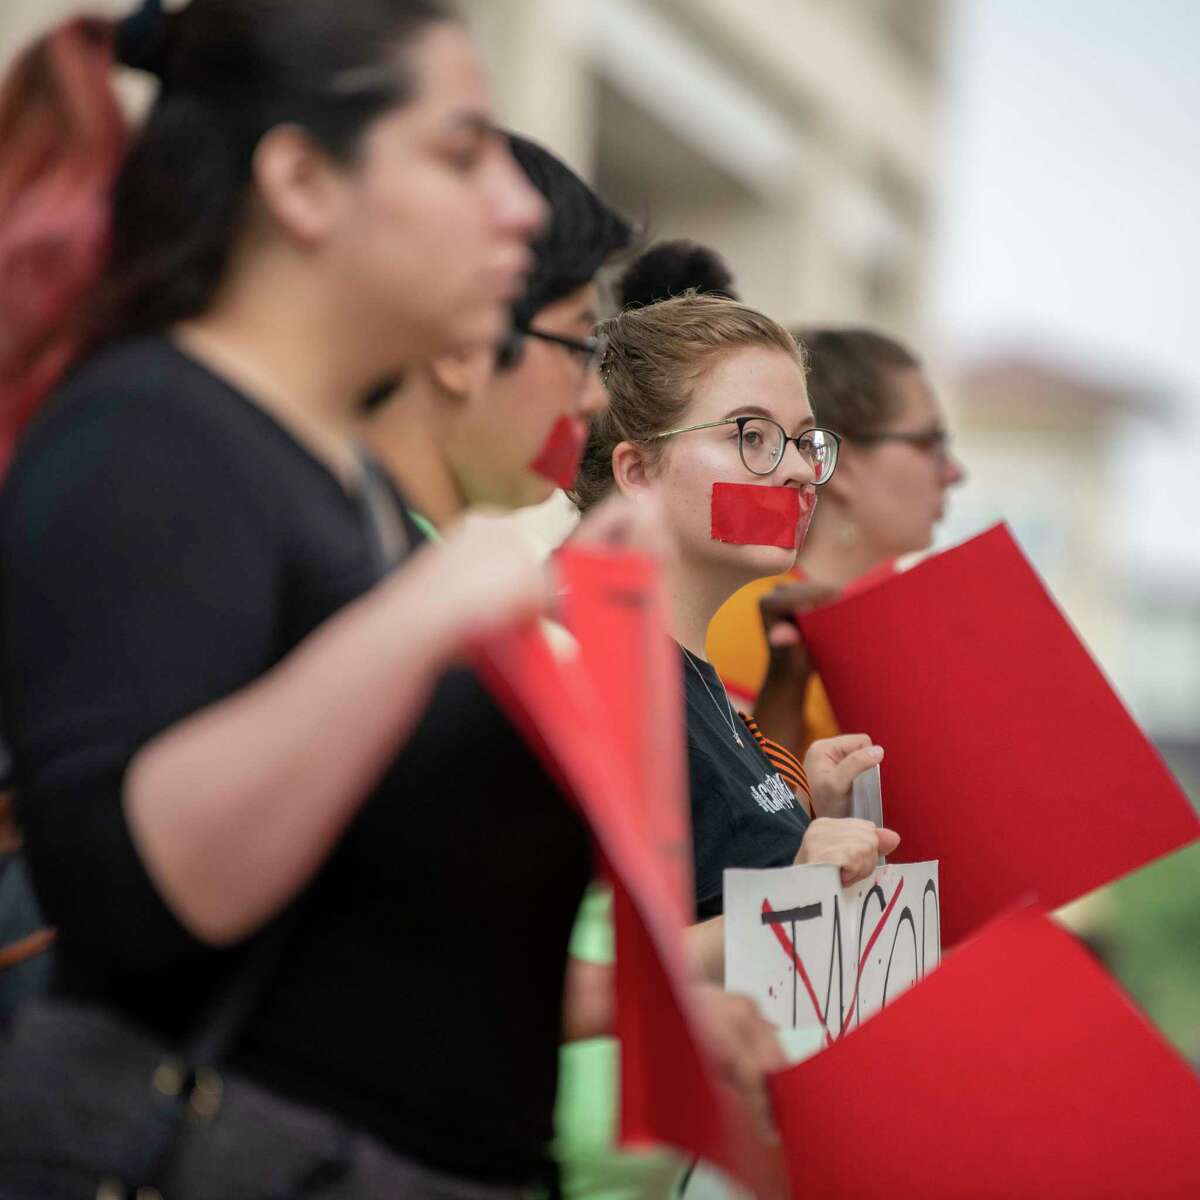 UTSA students in May gather to decry what they consider a rape culture. A reader praises the university for adopting a rule that deals with violent offenders.